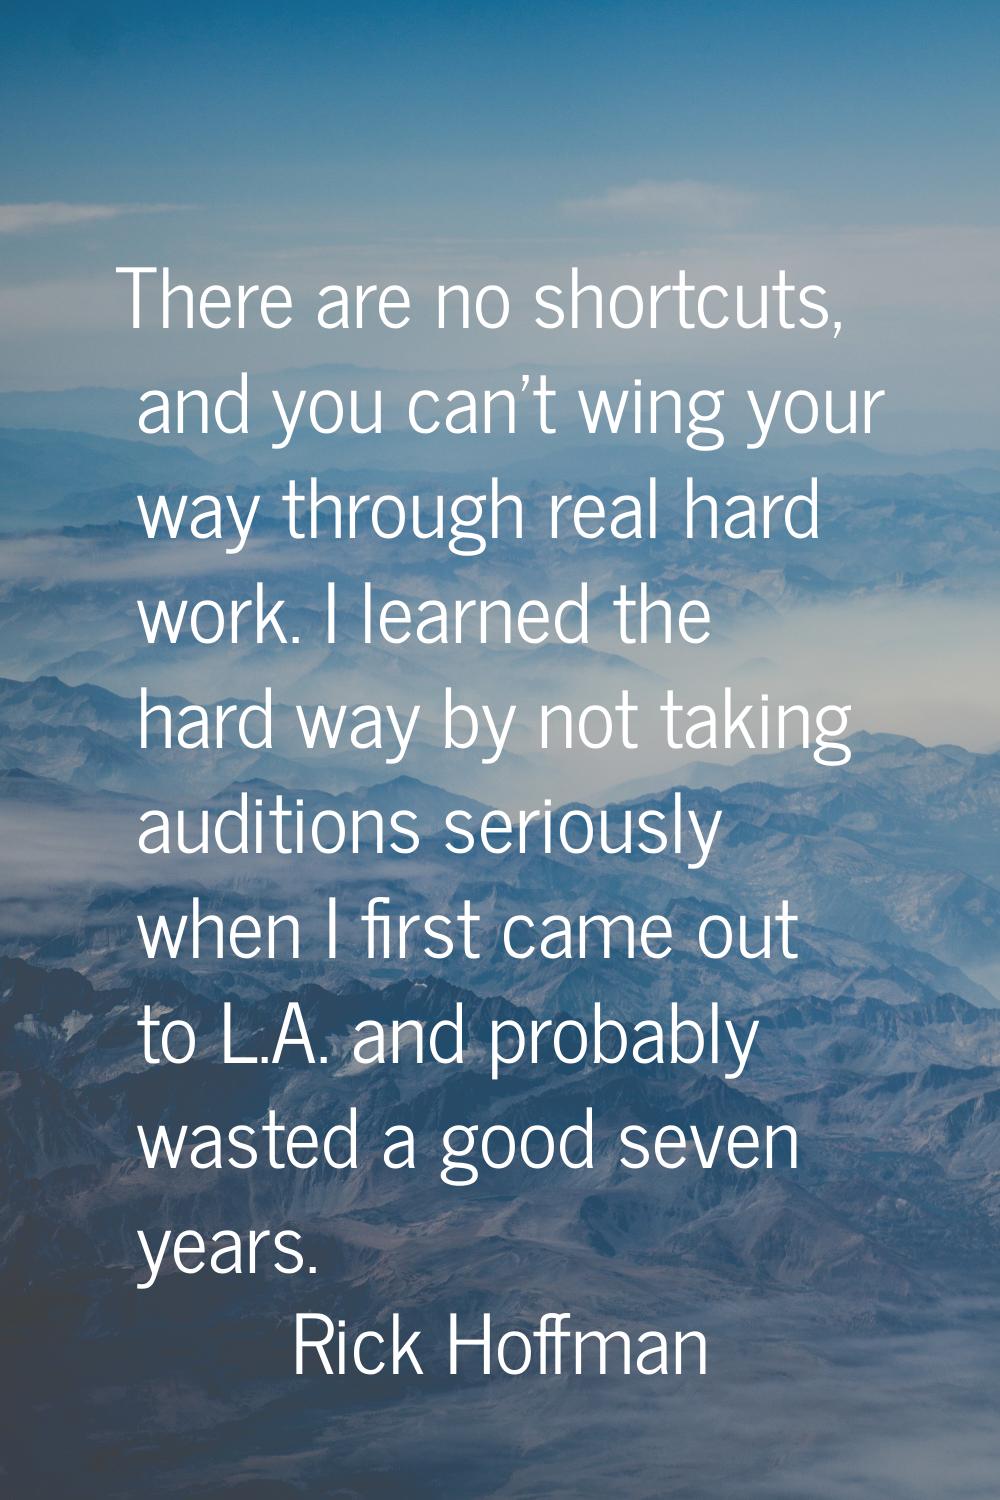 There are no shortcuts, and you can't wing your way through real hard work. I learned the hard way 